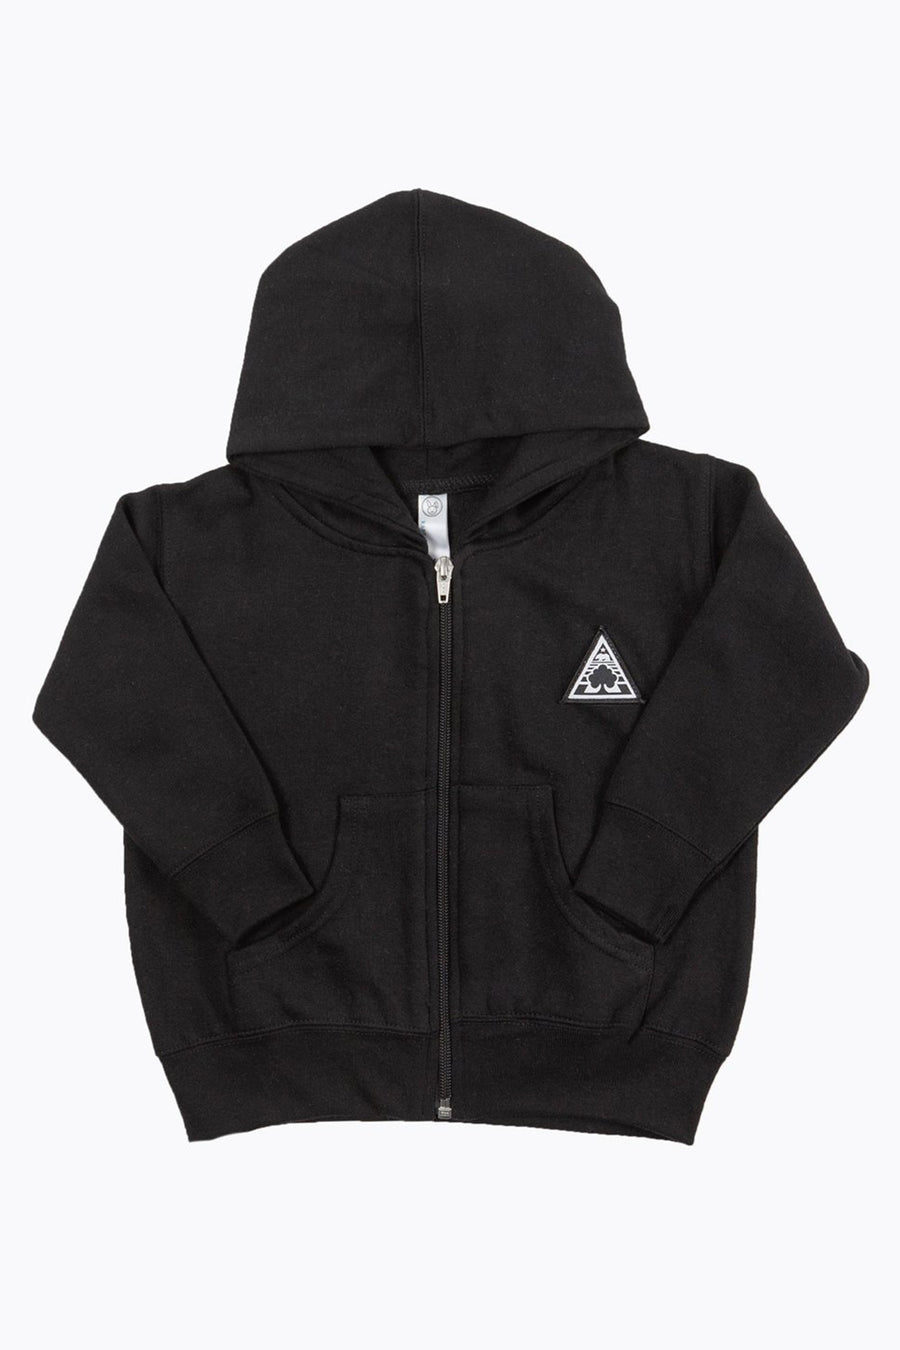 Republic Pyramid Patch Toddler Zip Up Hoodie